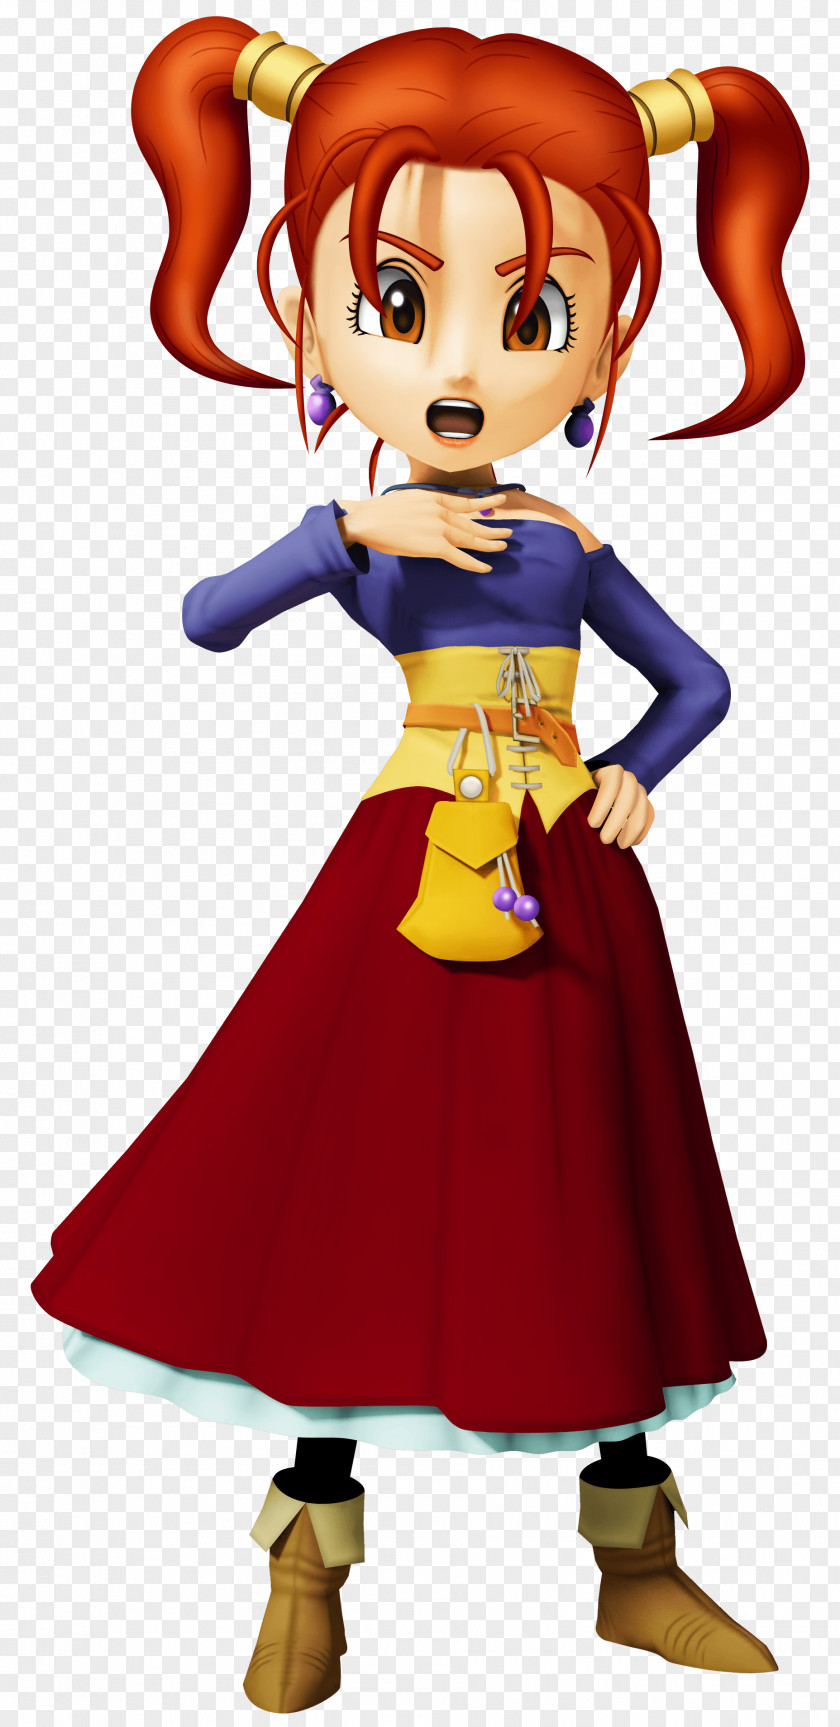 Folded Fortune Street Wii Super Mario Bros. Princess Peach RPG PNG